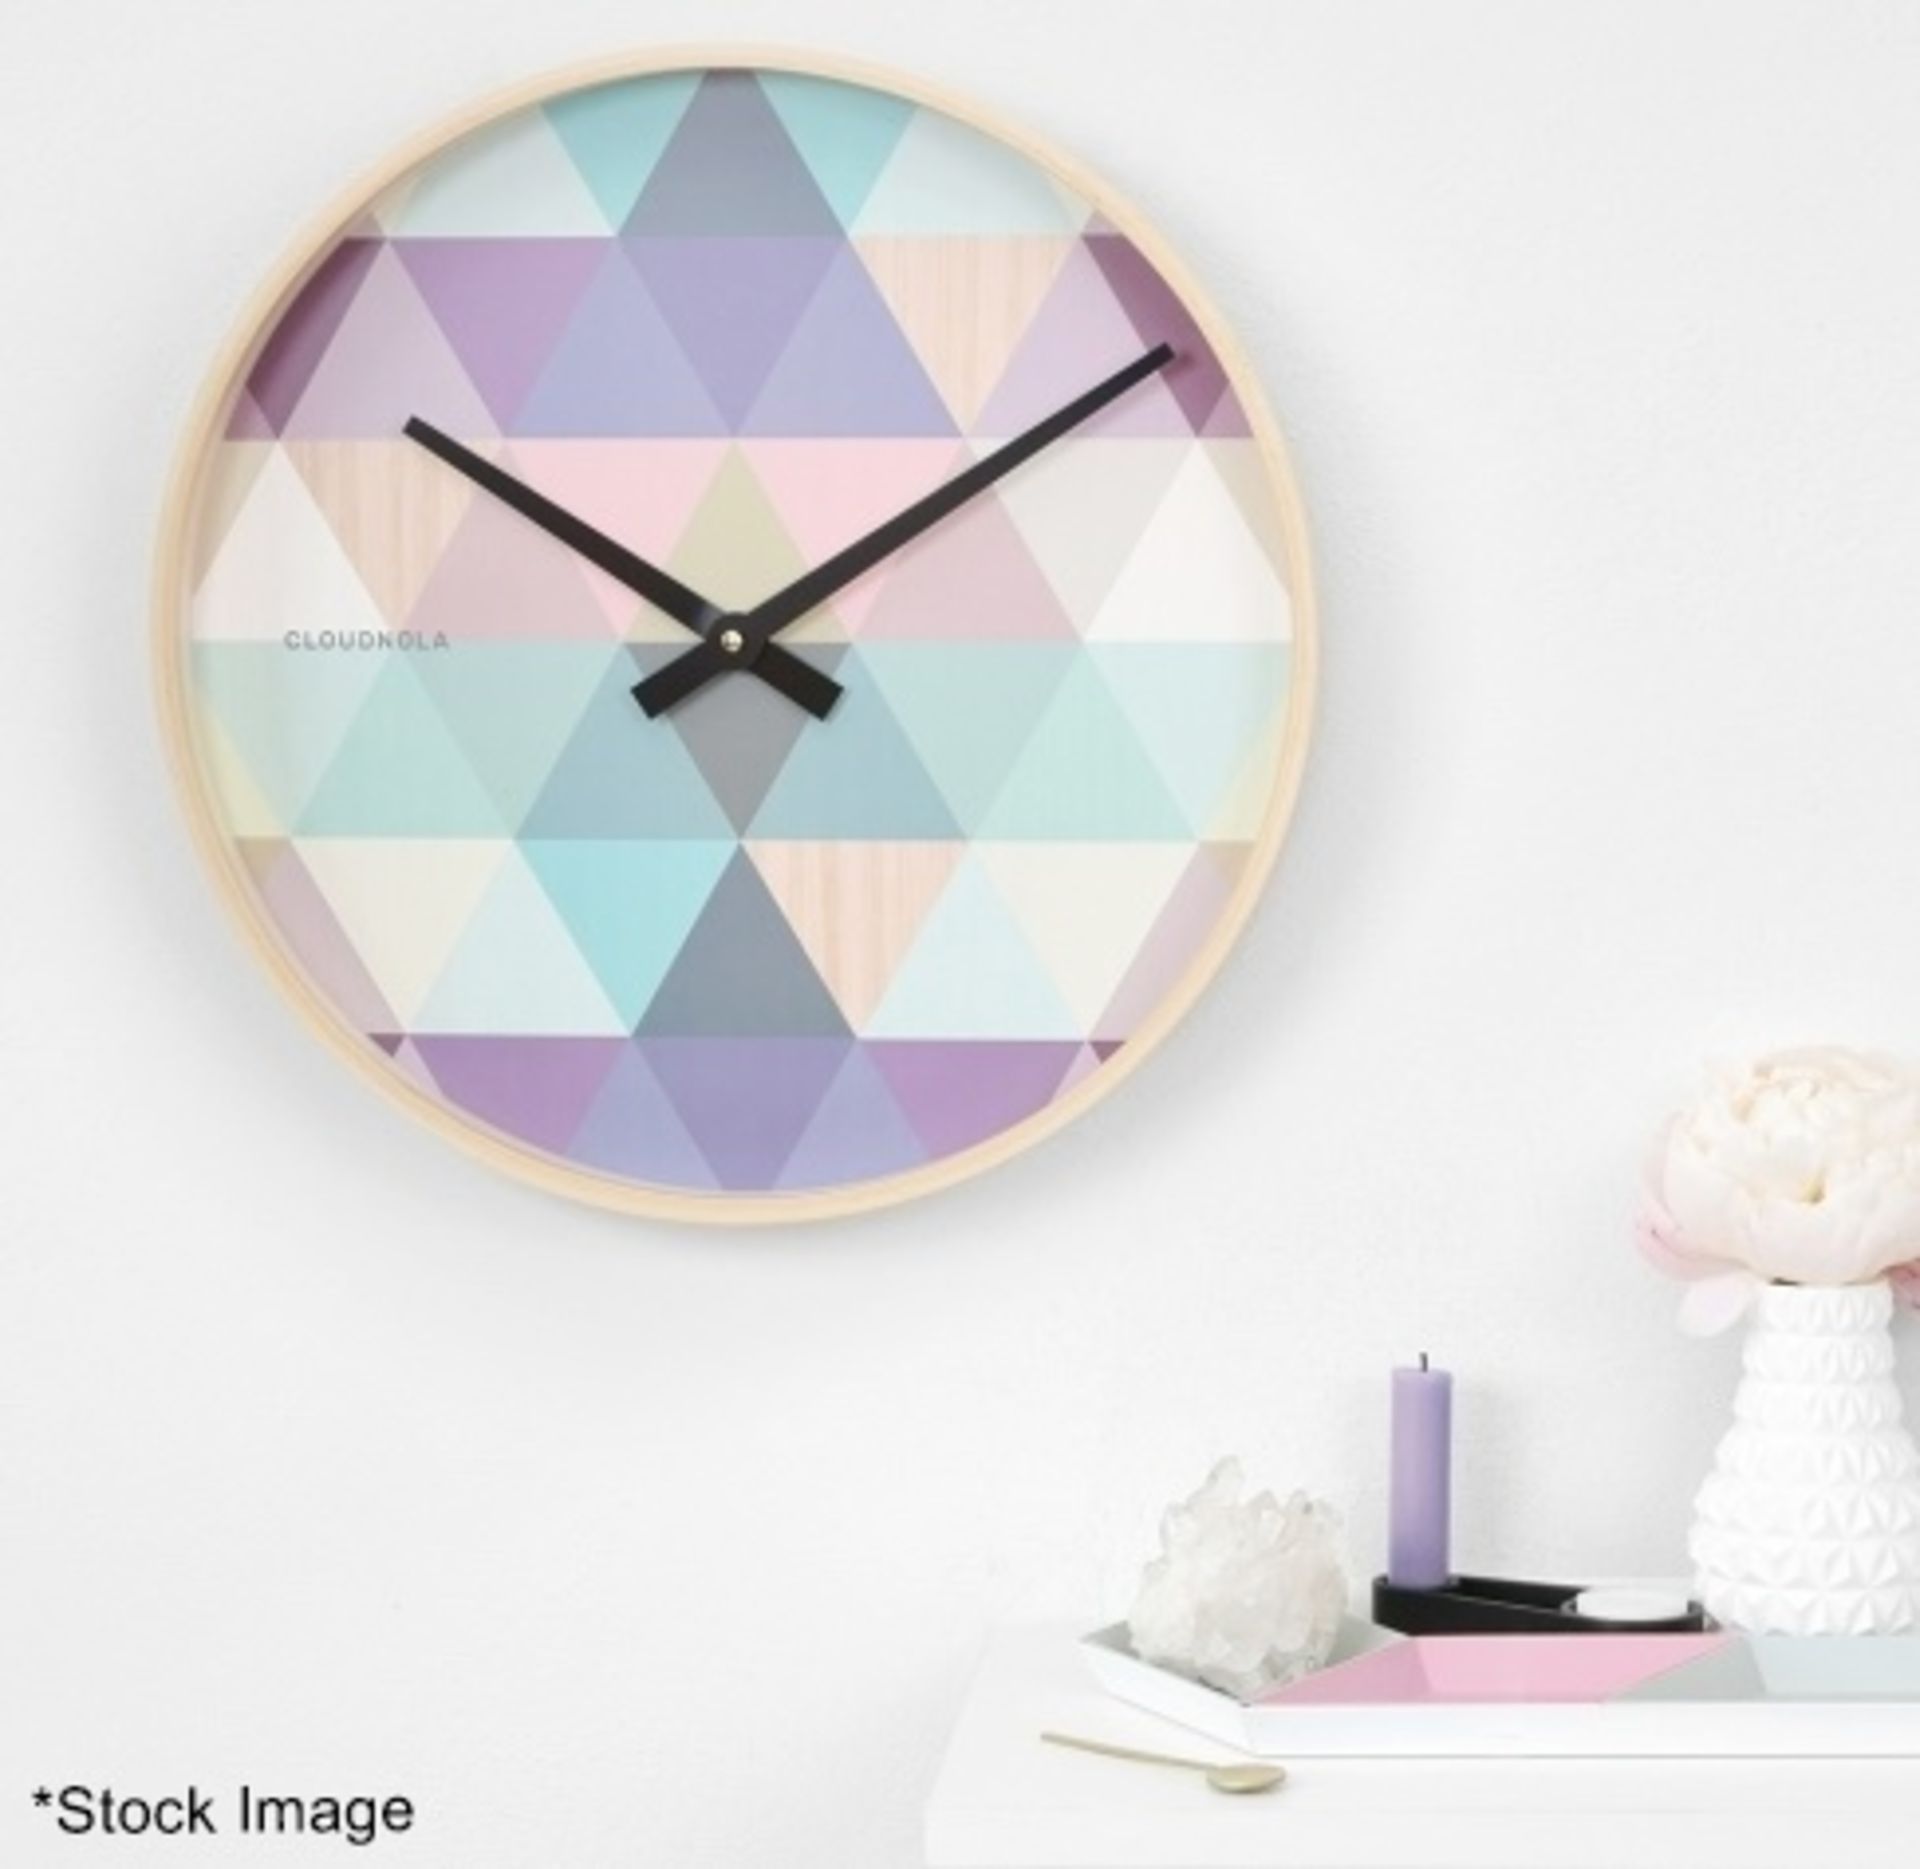 1 x CLOUDNOLA Tonic Blue Wooden Wall Clock With Geometric Pastel Patterned Birch Wood 40cm